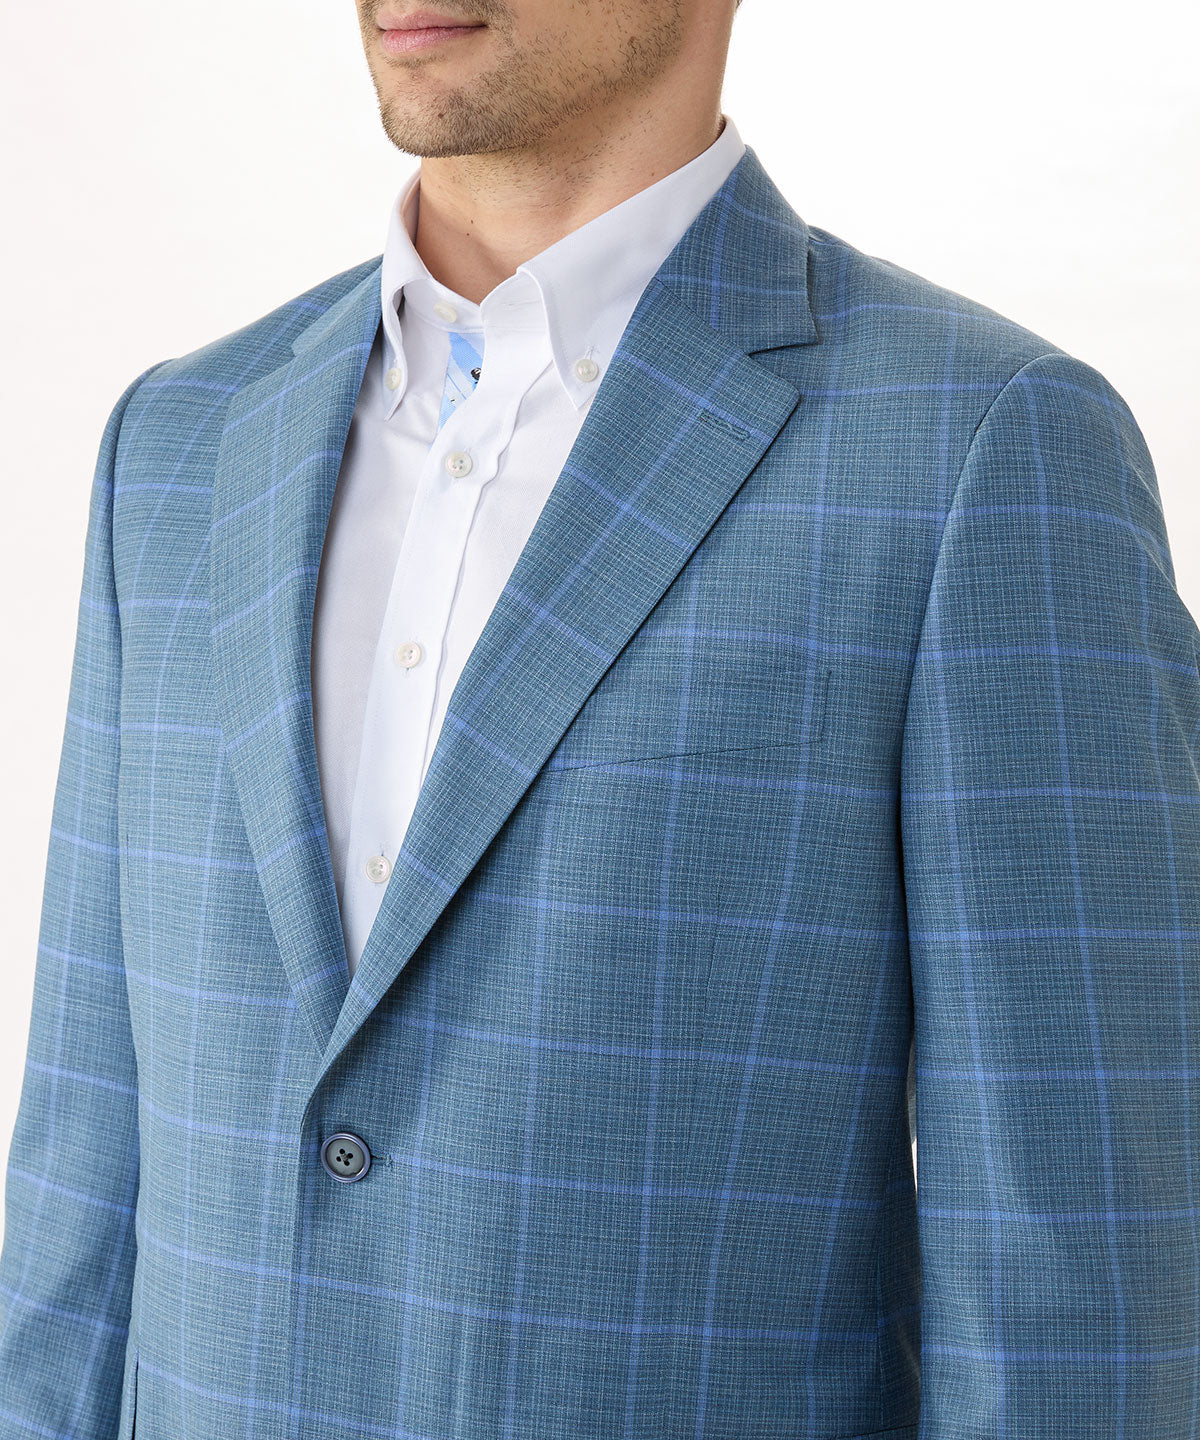 English Riding Jacket l Ocean Blue Plaid with White Piping – Marigold  Riding Apparel